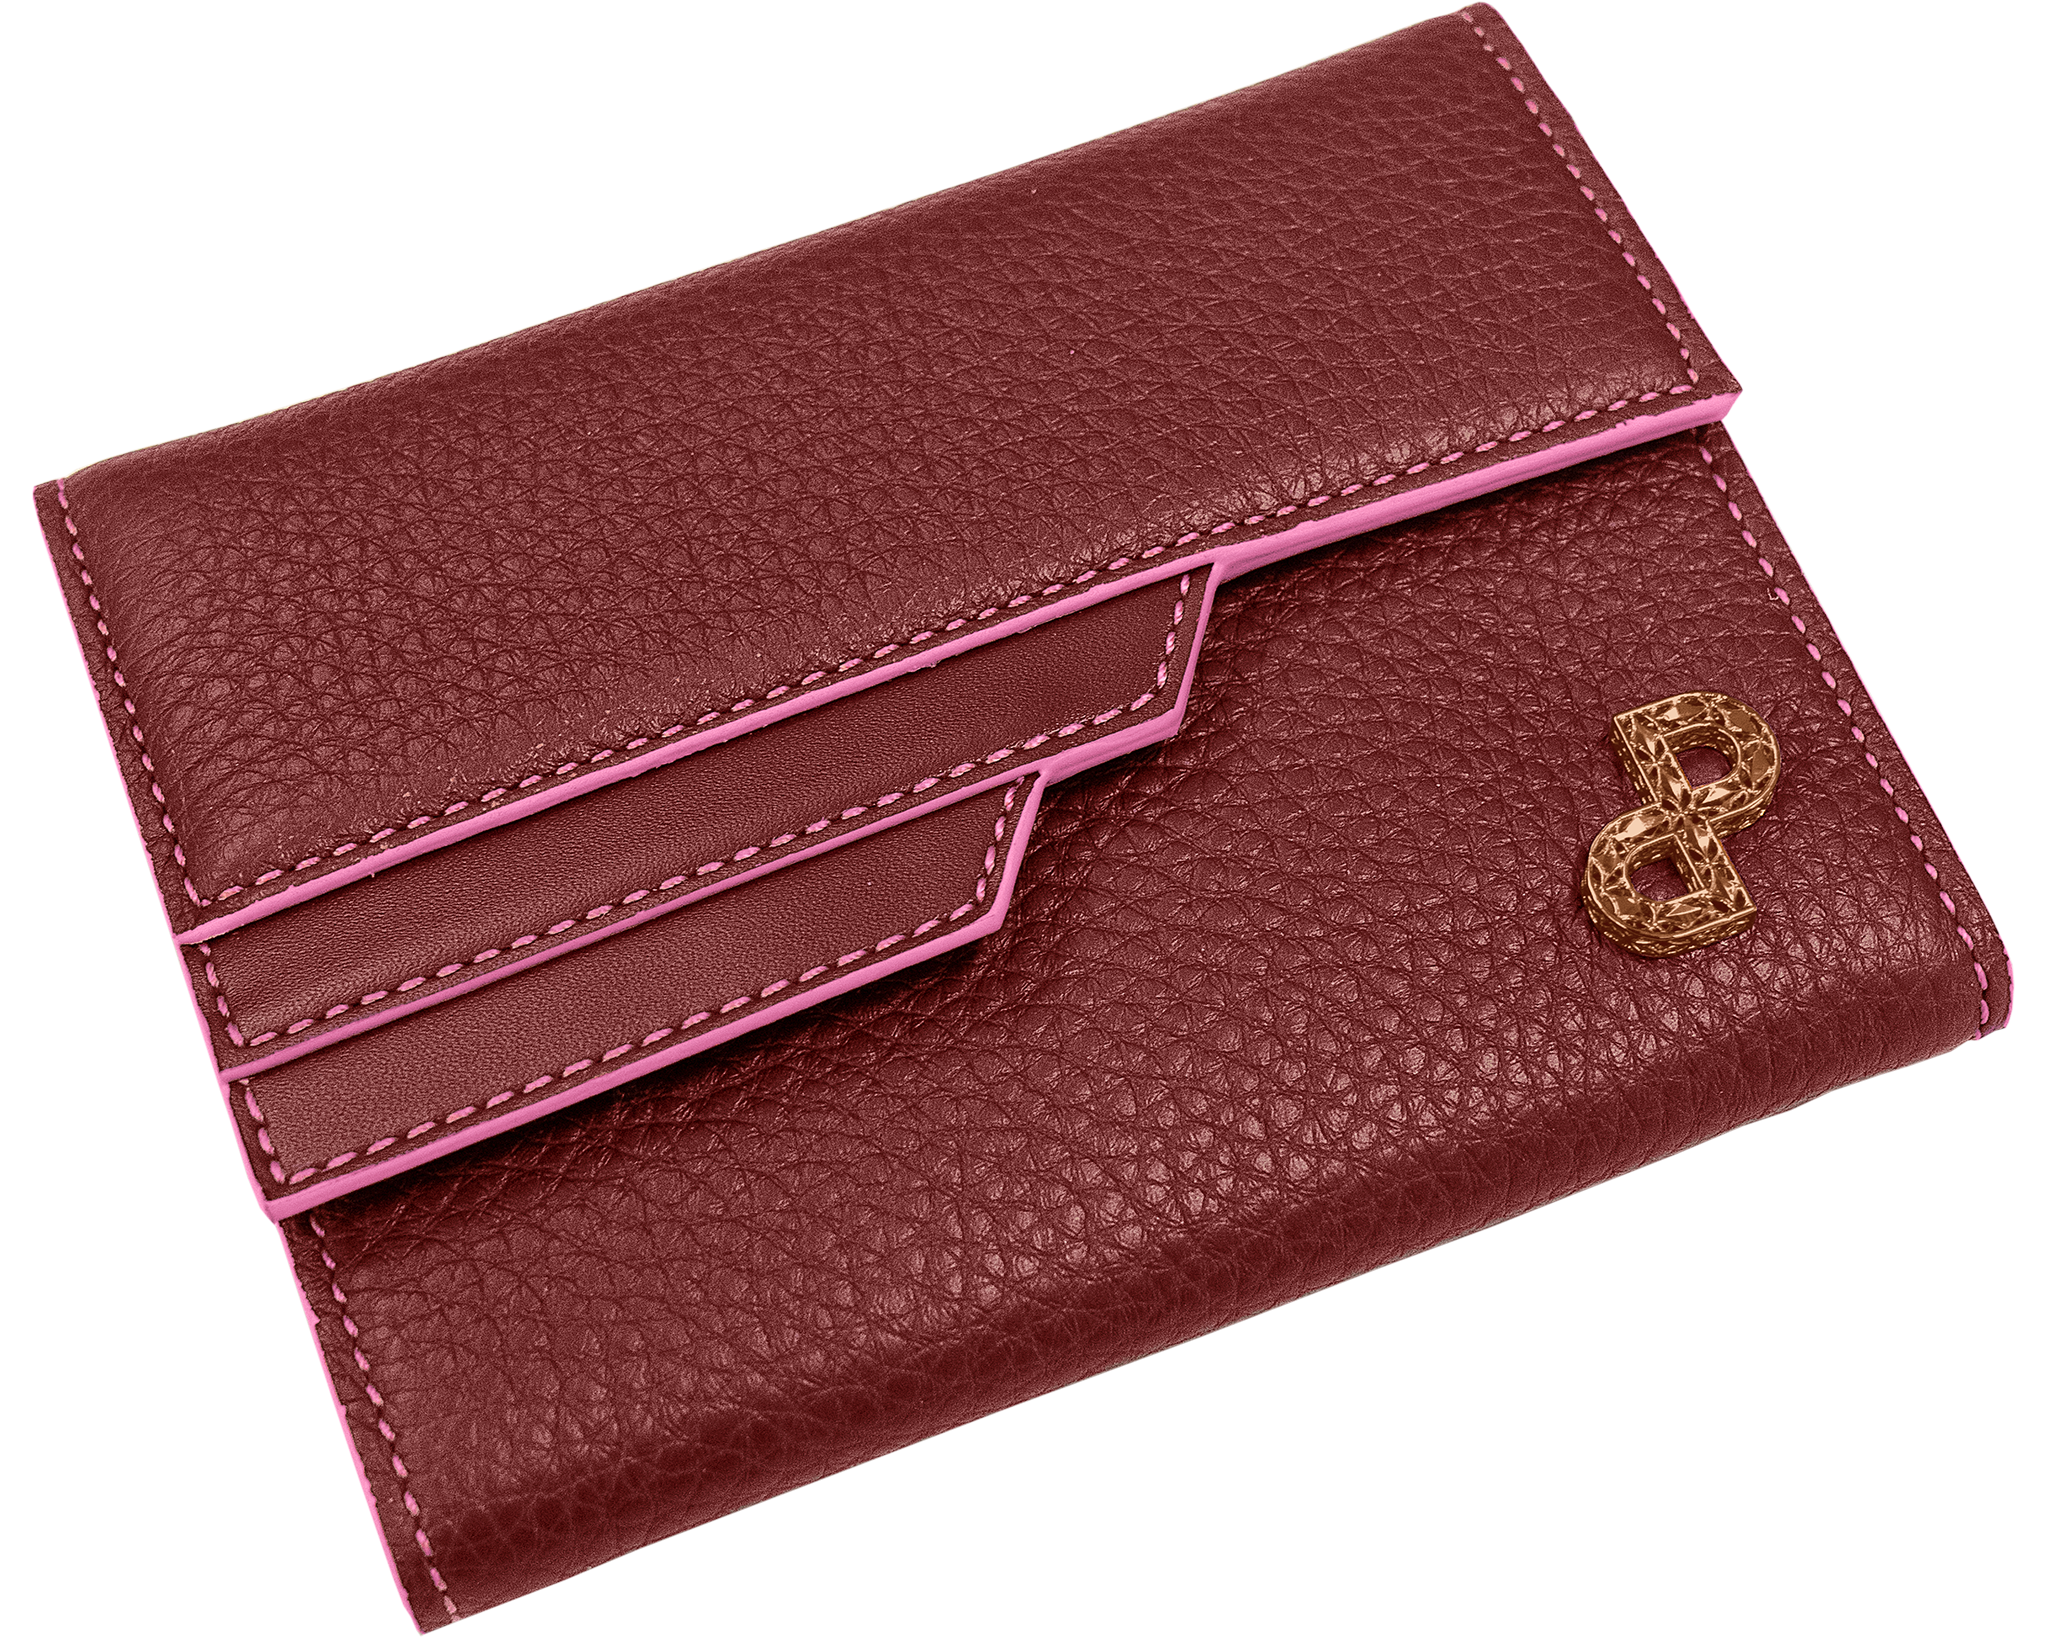 The definition of designer elegance, the JULIA is an icon of sophistication you can always carry with you. Each piece is Individually crafted with, featherweight, hand-carved, 3D Forever Logo hardware- All MADE IN ITALY